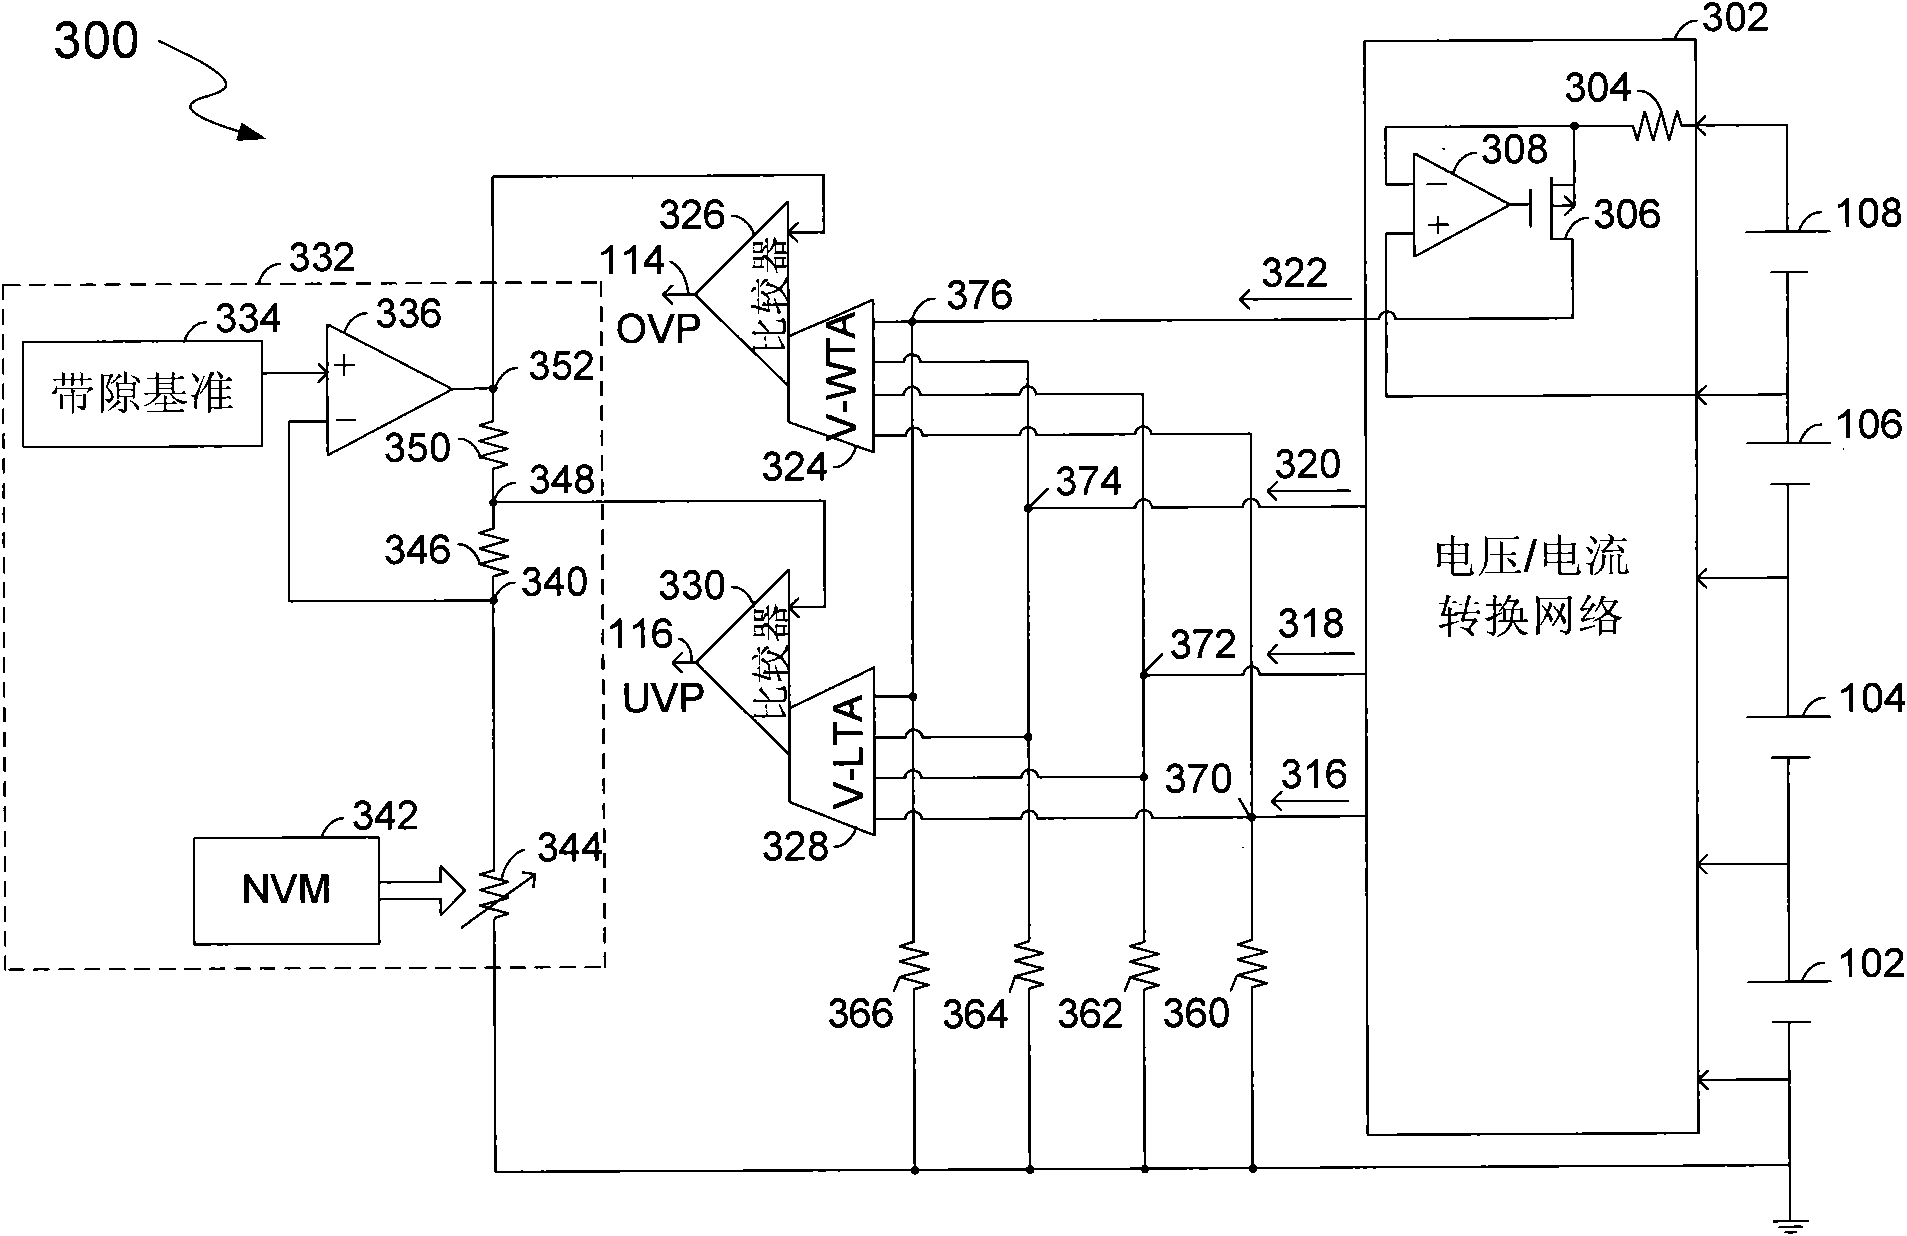 Multi-cell battery pack protection circuit